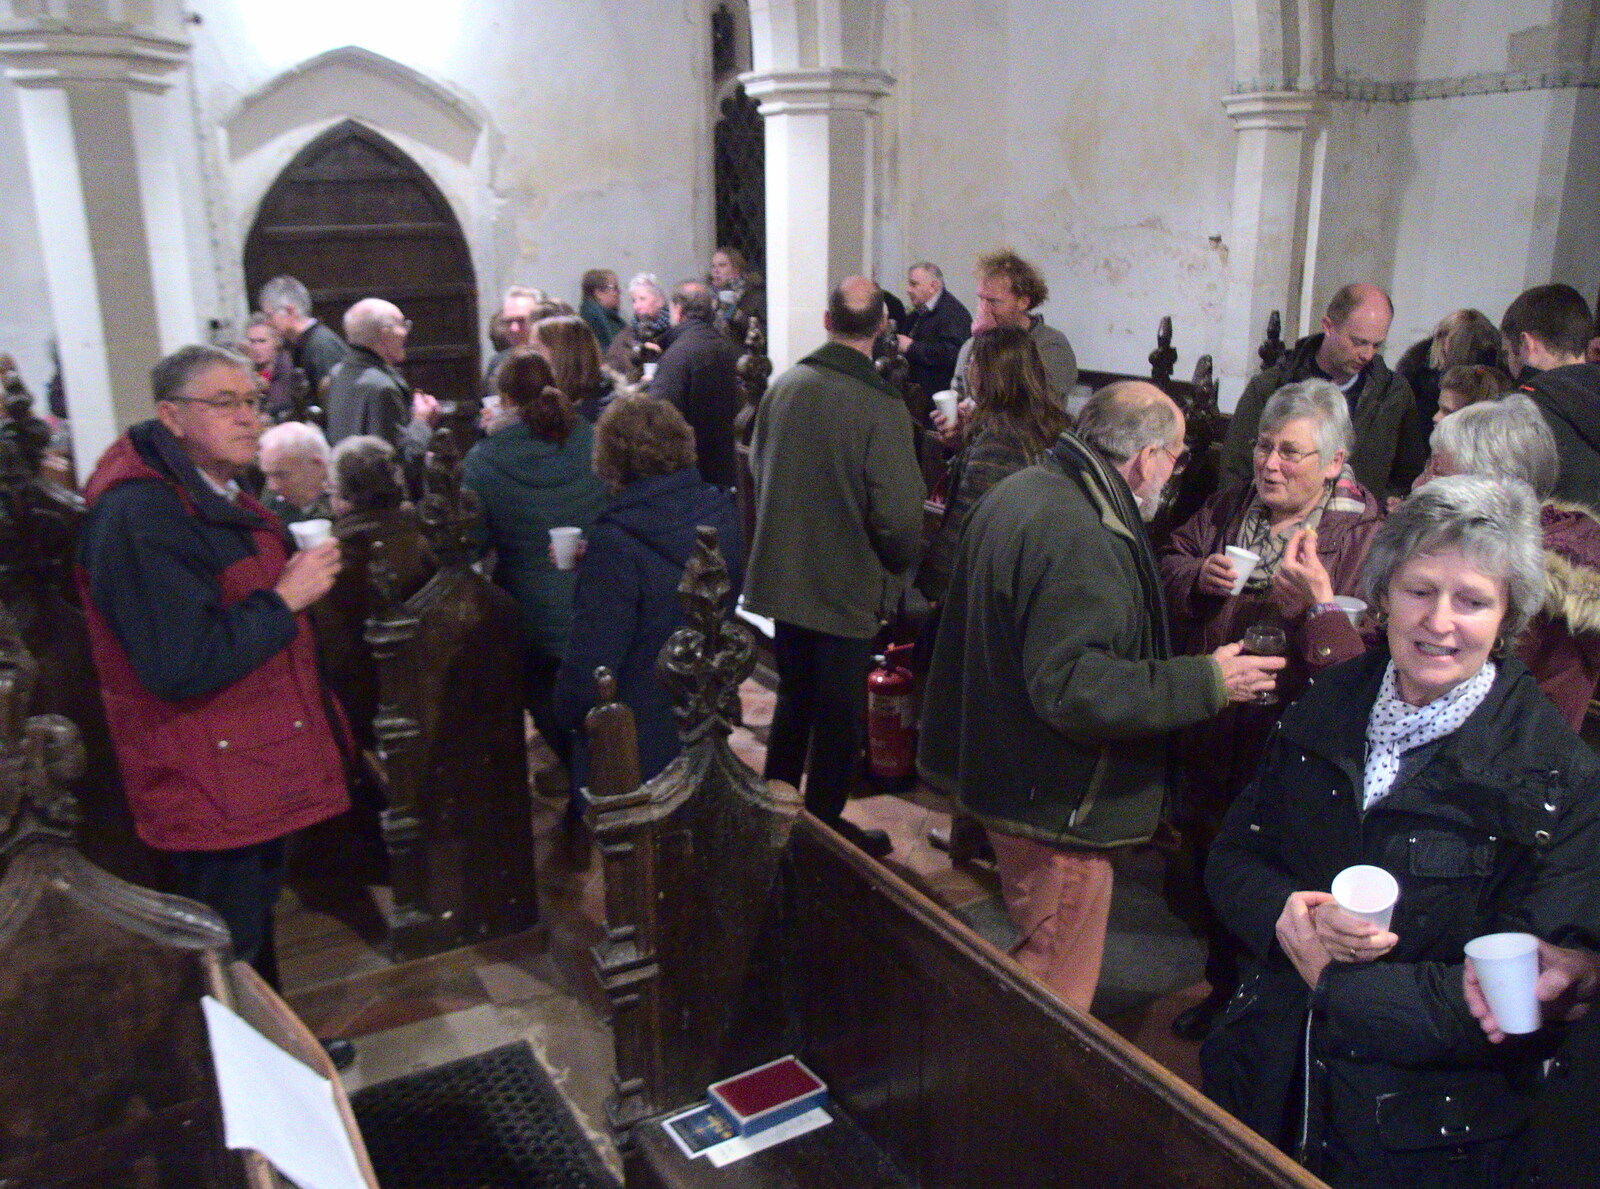 Jill and the BSCC are in attendance from Christmas Carols at St. Margaret's, Thrandeston, Suffolk - 17th December 2018